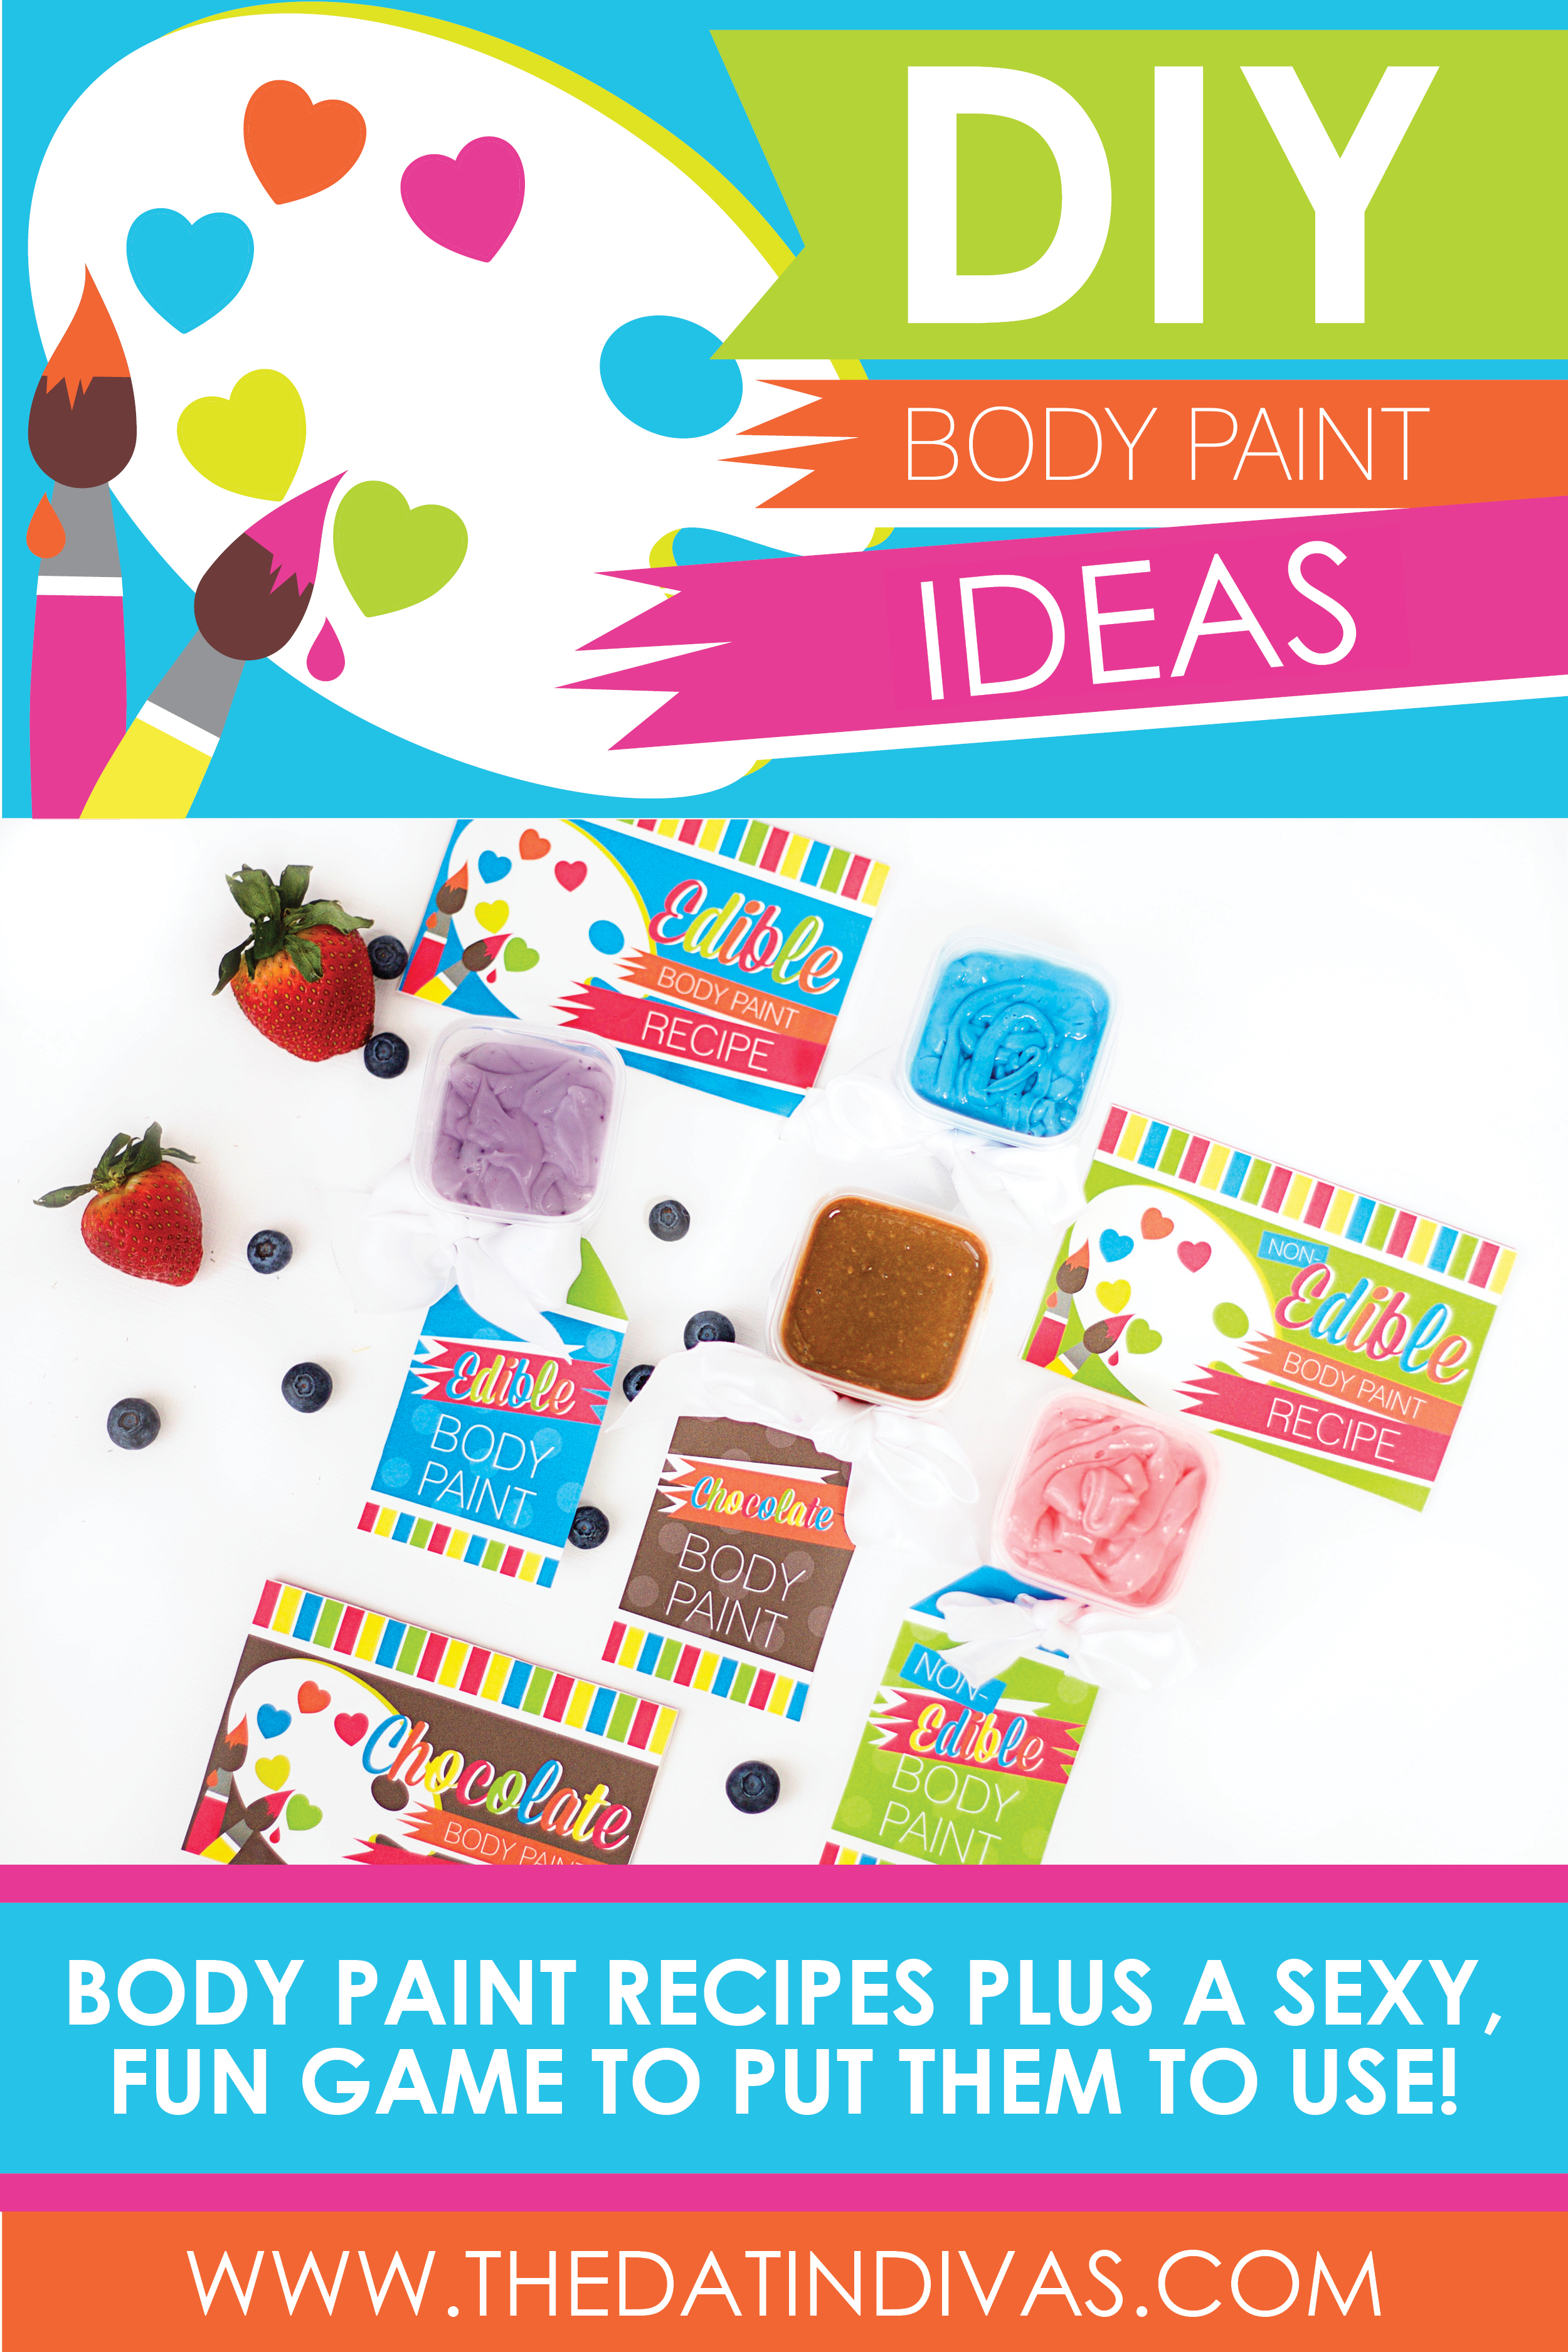 Body painting is such a clever and fun way to reconnect! I love these recipes from thedatingdivas.com #bodypainting #bodypaintideas #DIYchocolatebodypaint